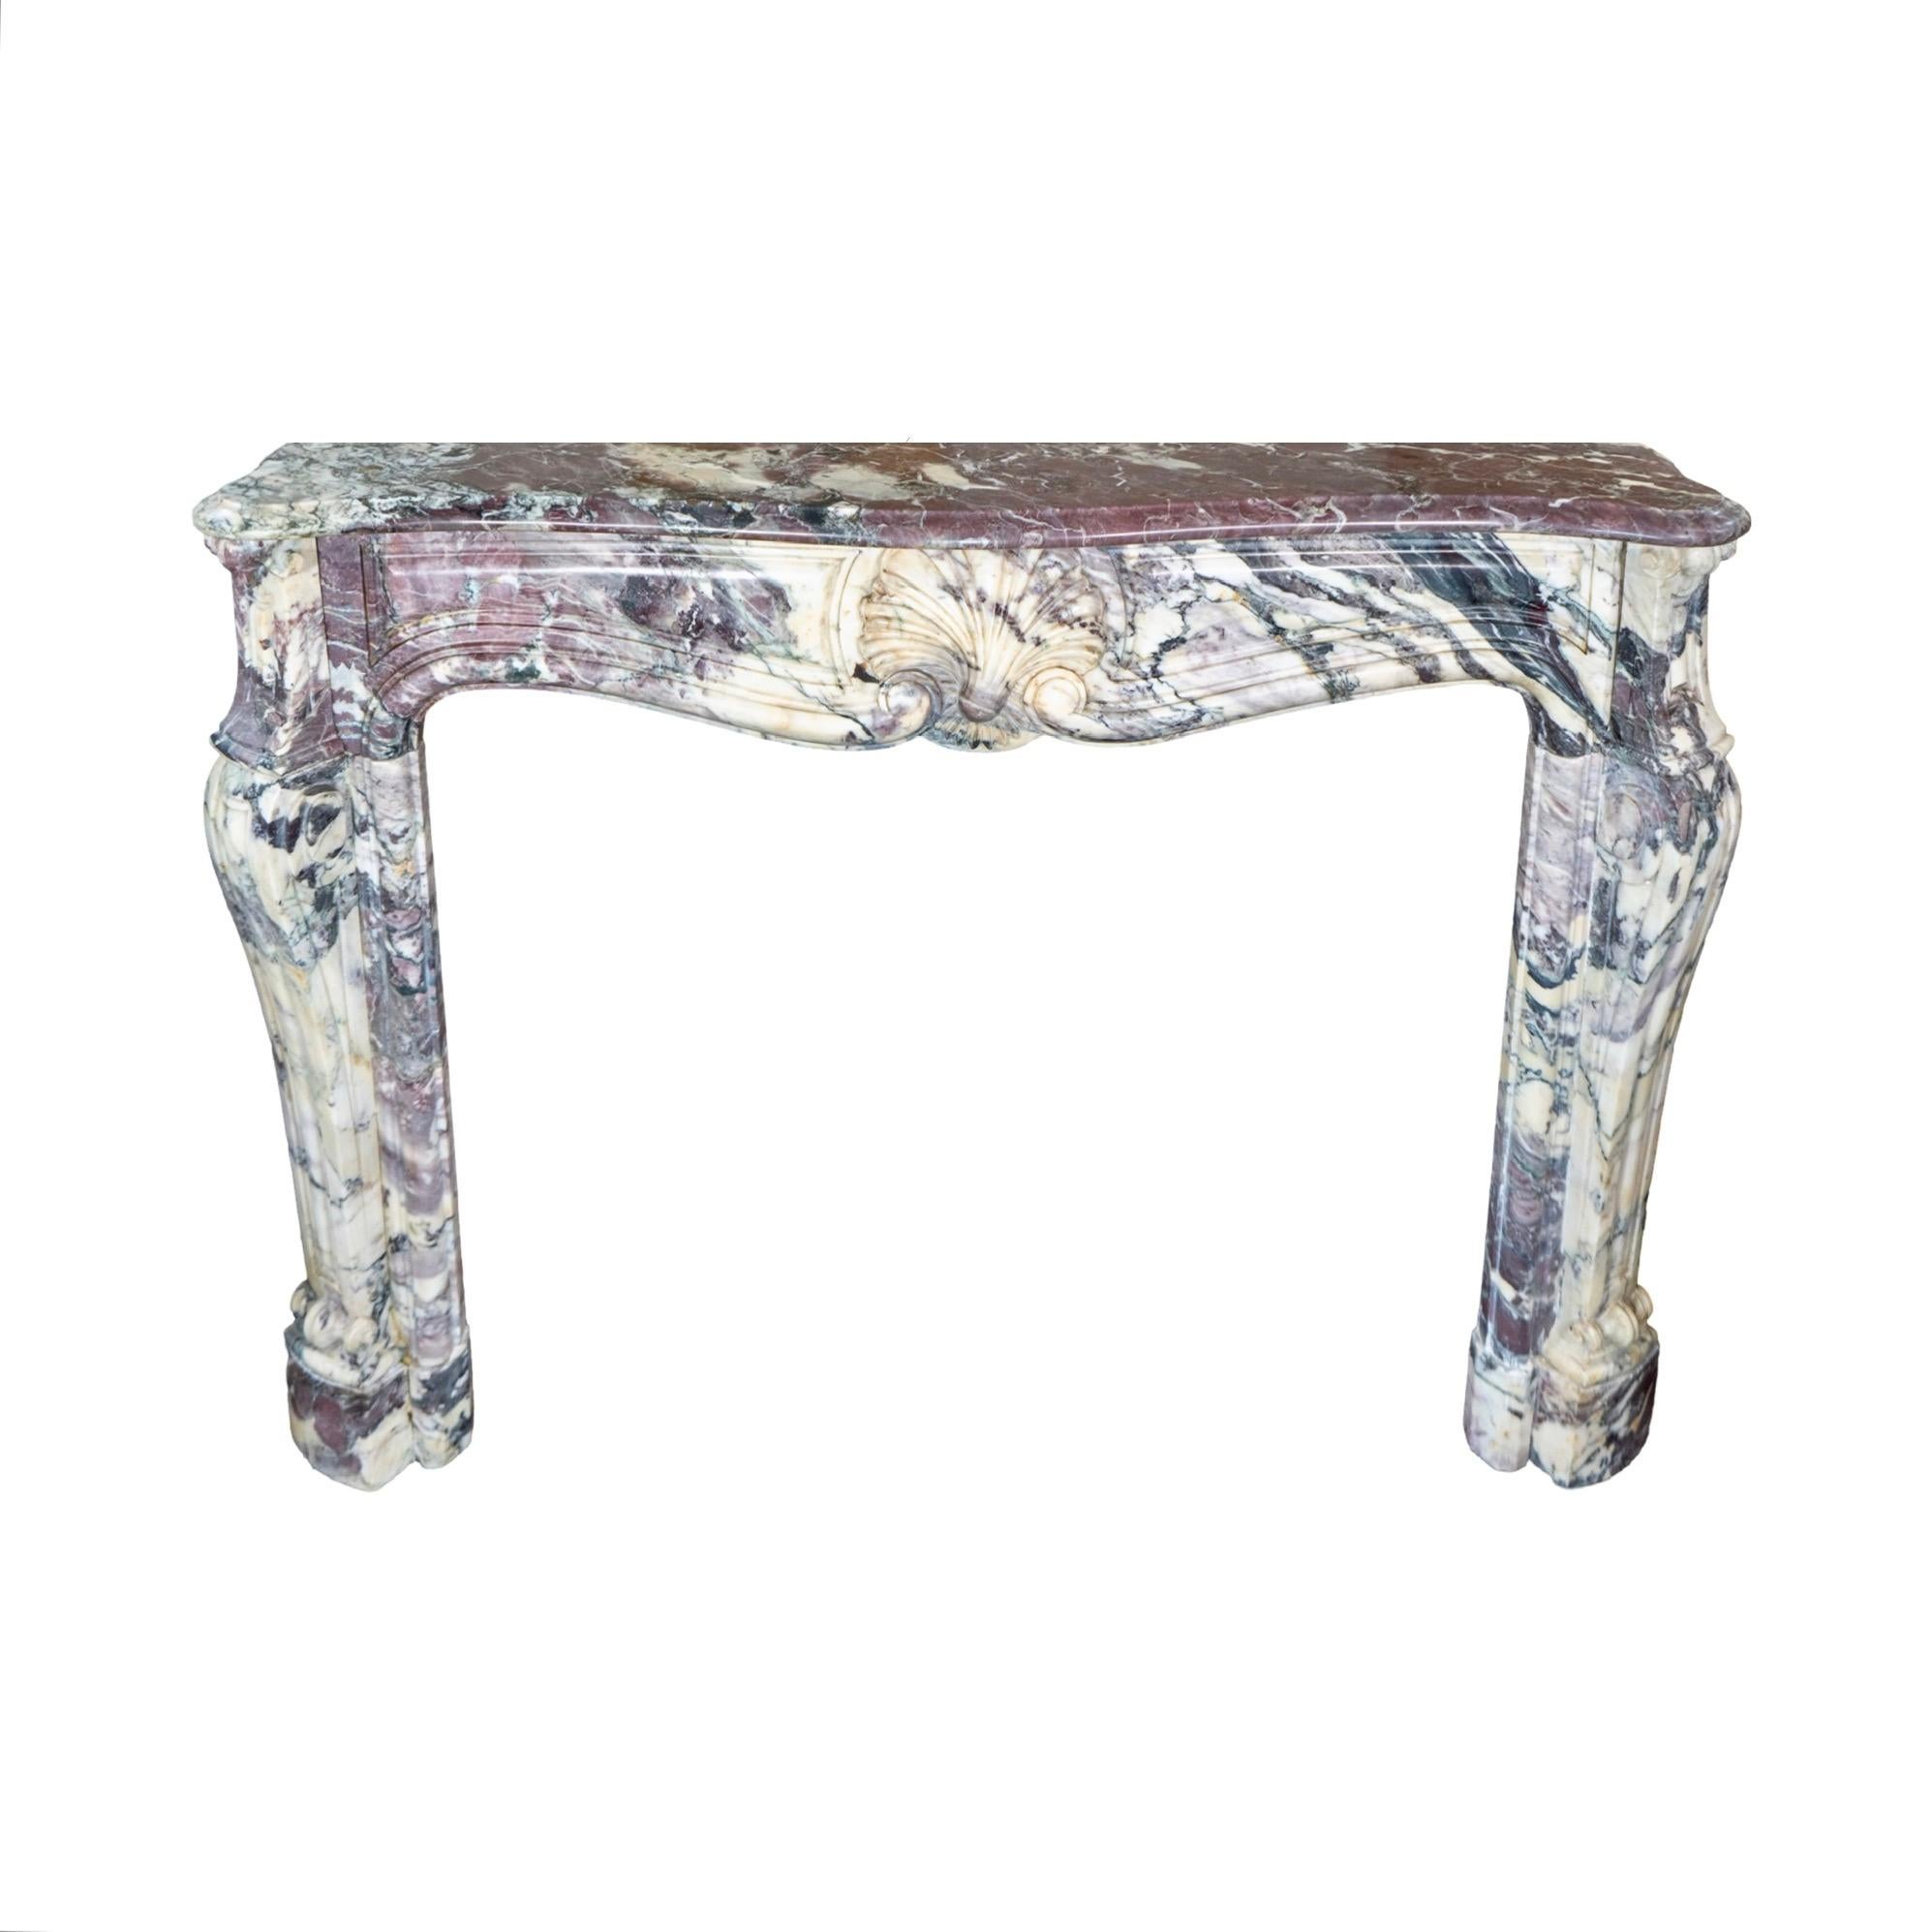 Expertly crafted from 1820 French Villefranche Peach Flower Marble, this marble mantel boasts intricate carvings and a stunning carved shell motif. Enhance your home's aesthetic with this timeless and elegant piece.